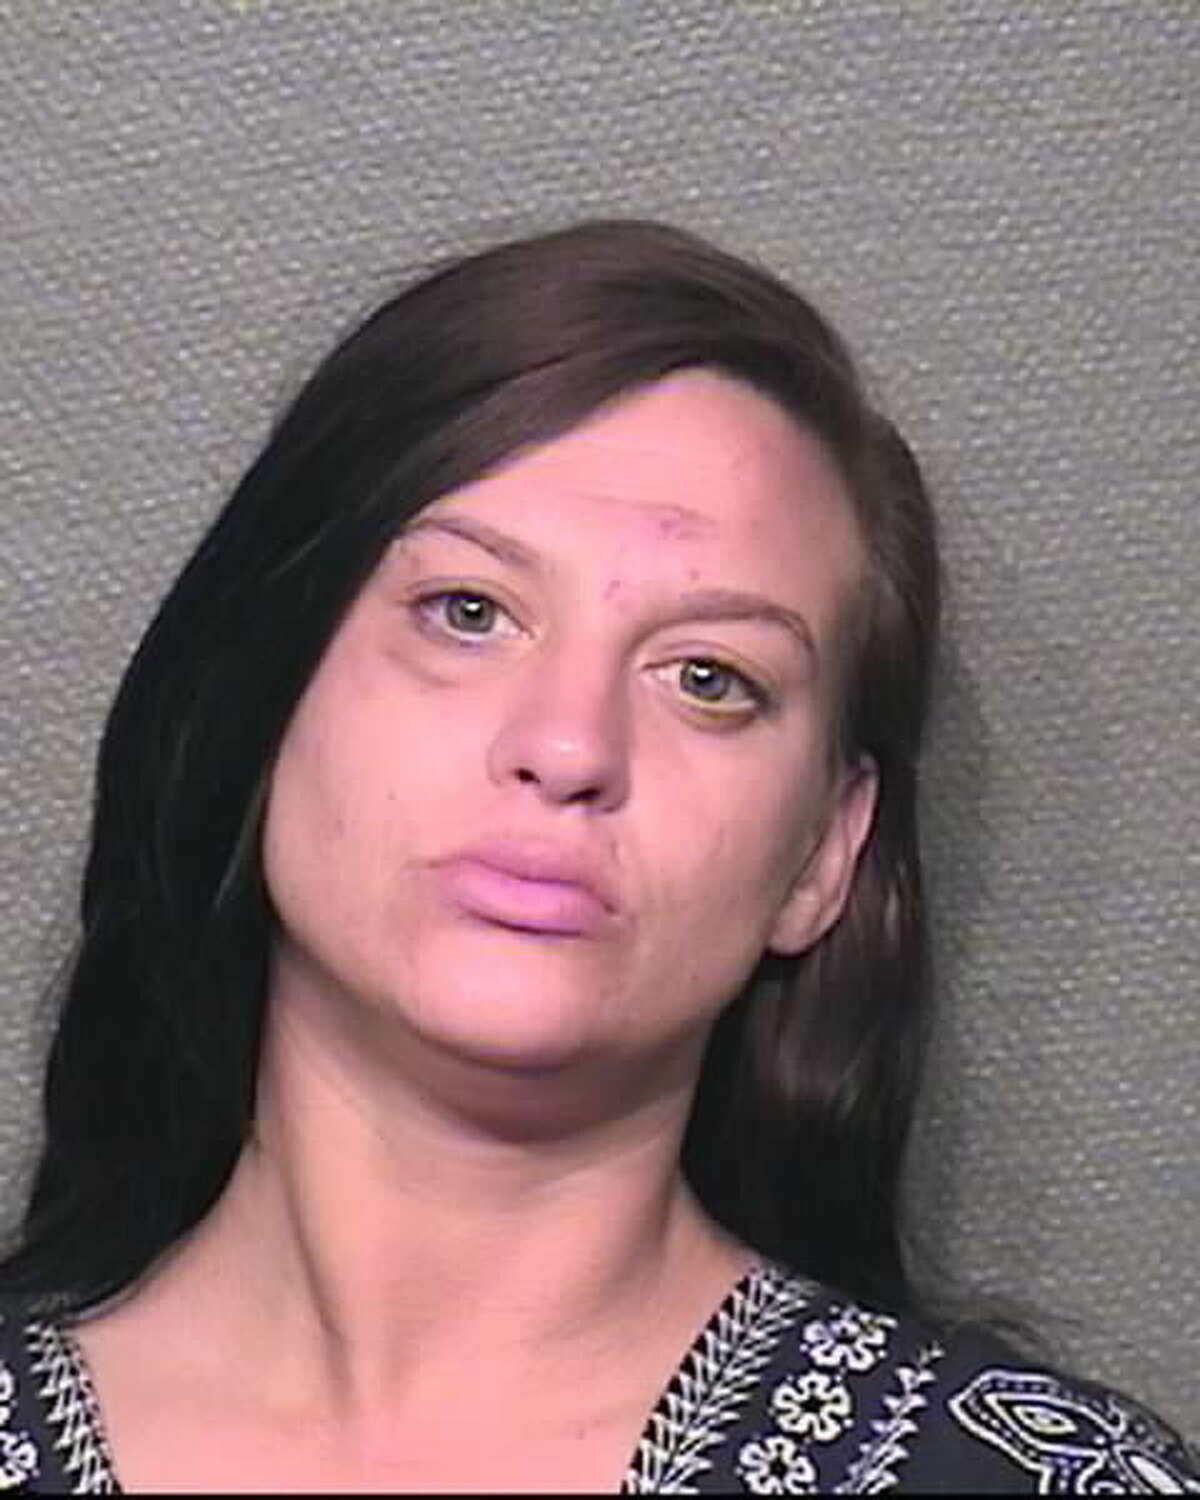 Alexandria Arce was arrested by Houston Police on Dec. 21, 2015 and charged with felony prostitution.